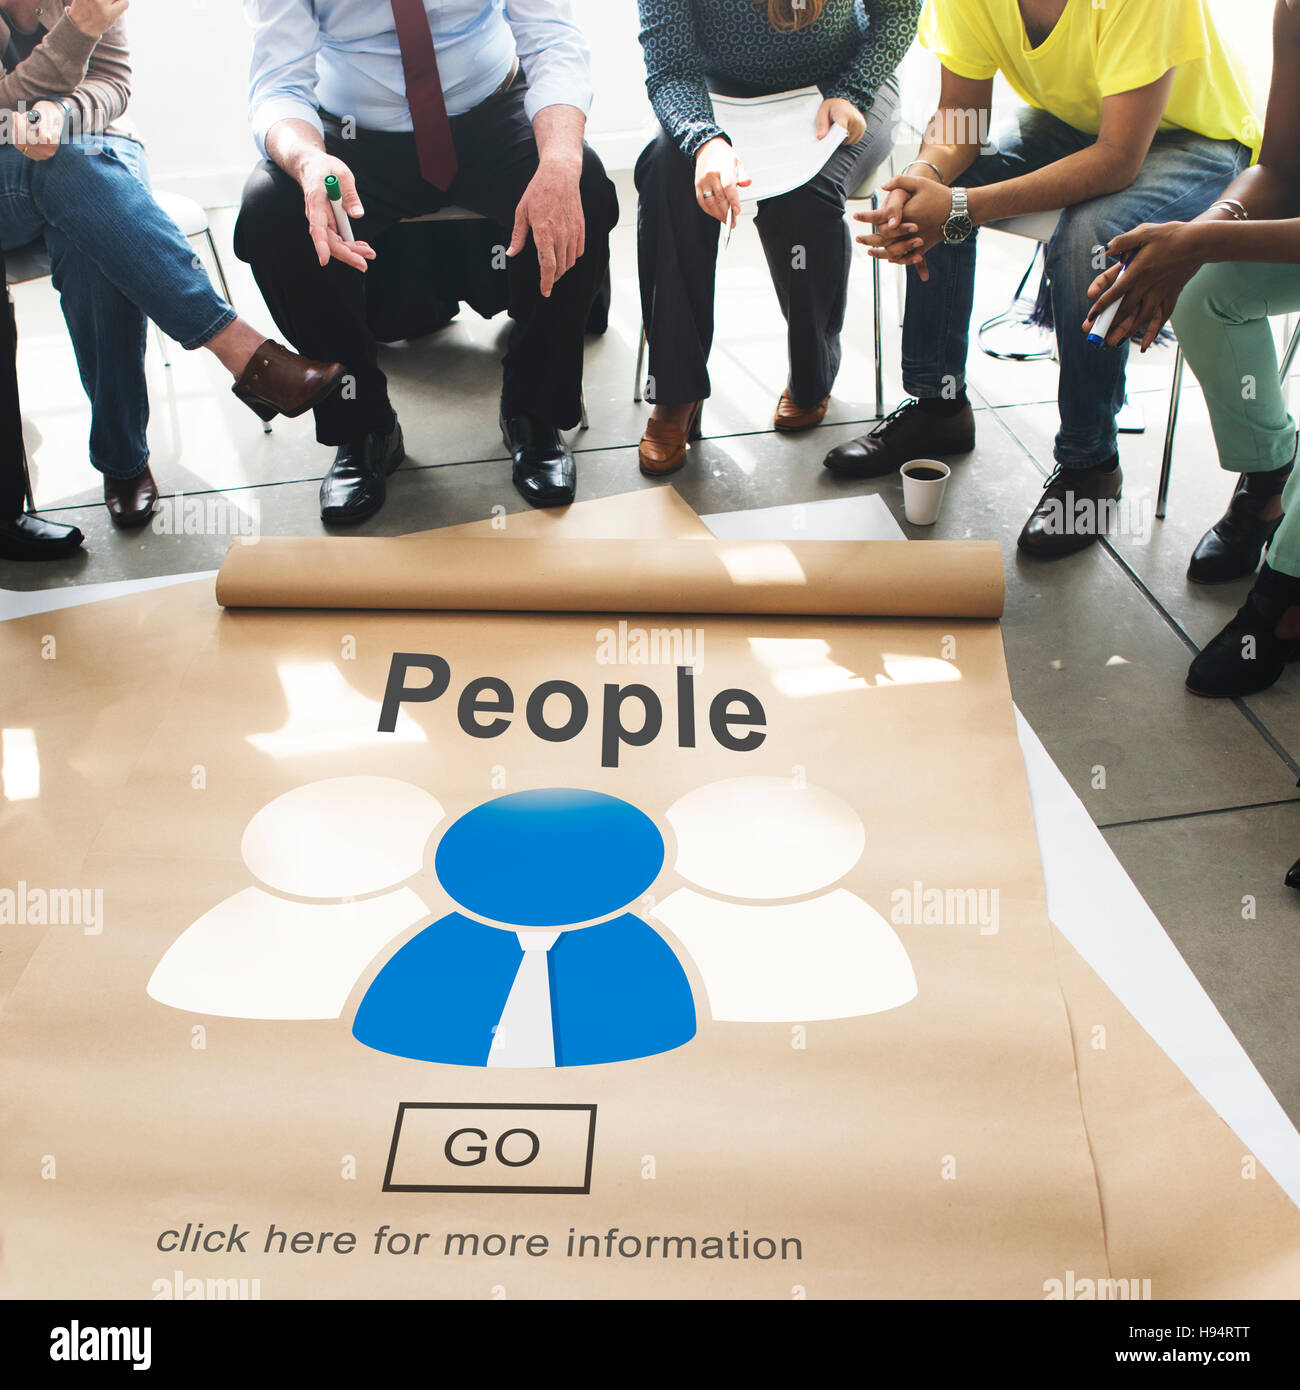 People Community Connection Communication Society Concept Stock Photo